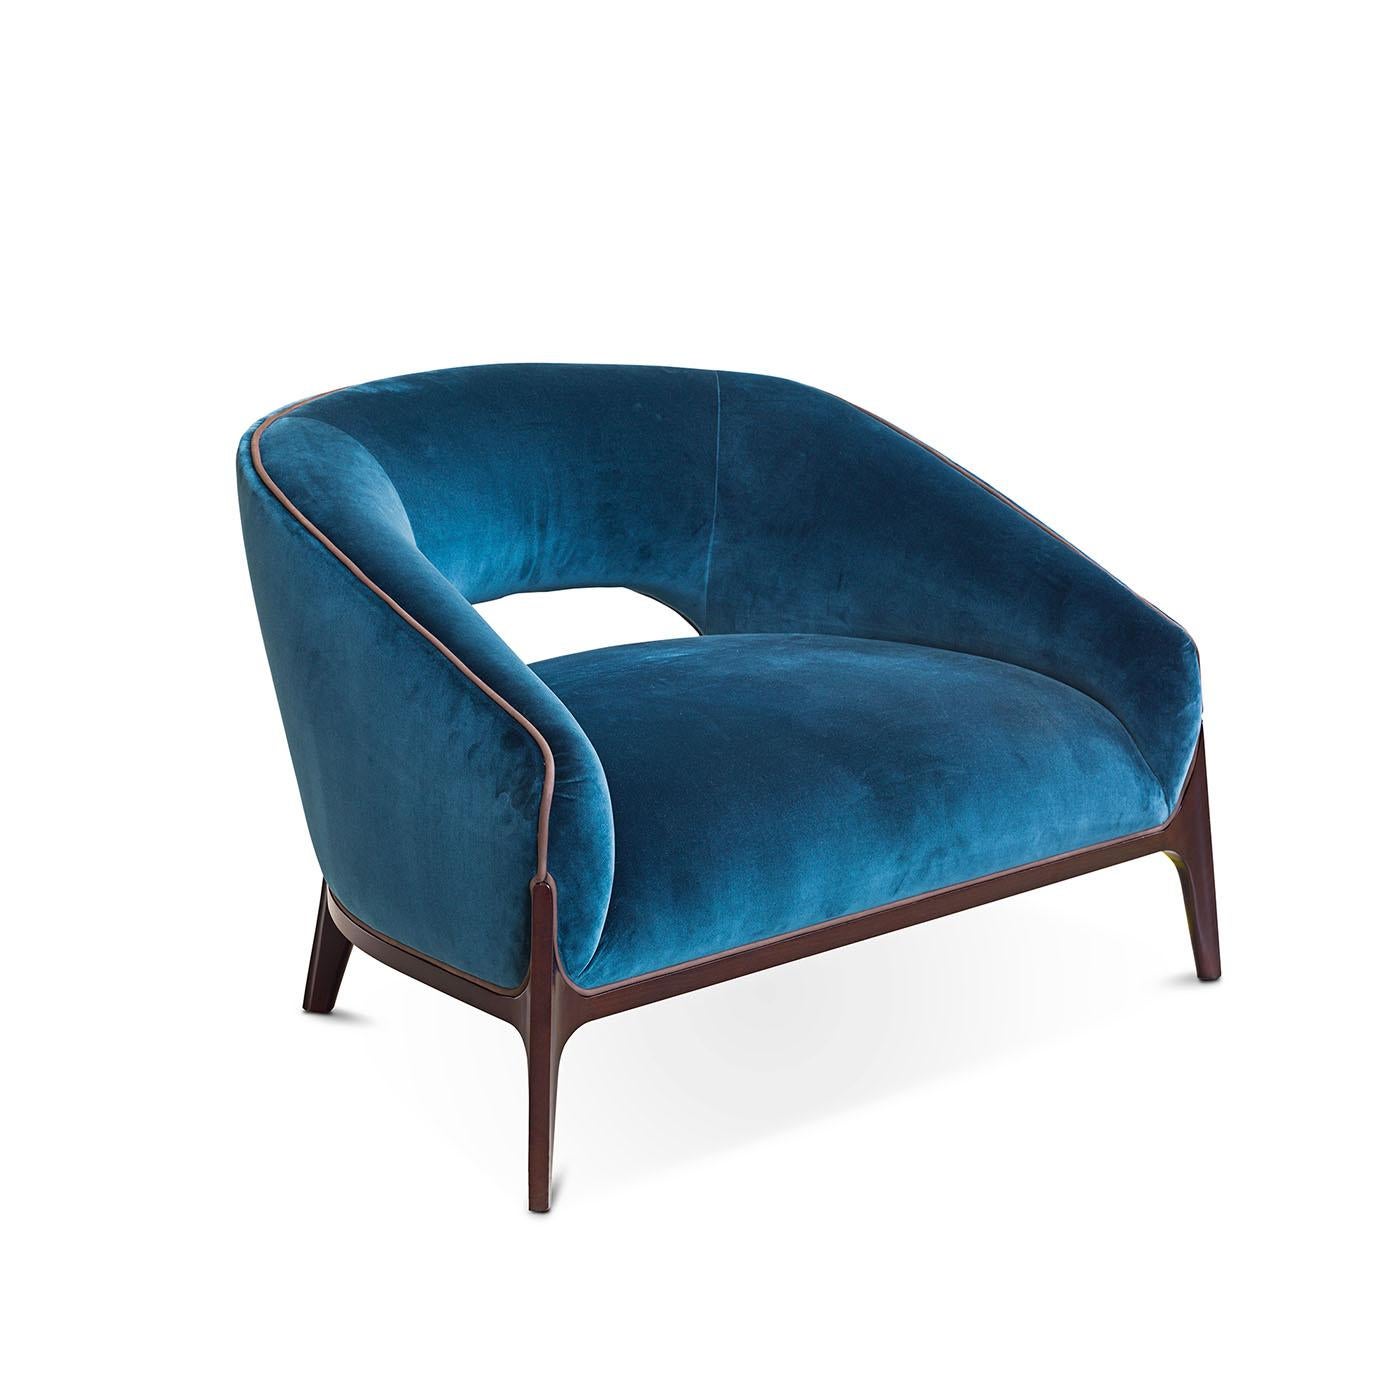 This blue armchair is made of velvet upholstery and complemented by a sturdy wooden frame. The leather piping detail along the backrest adds a sophisticated touch, creating a harmonious blend of comfort and elegance.